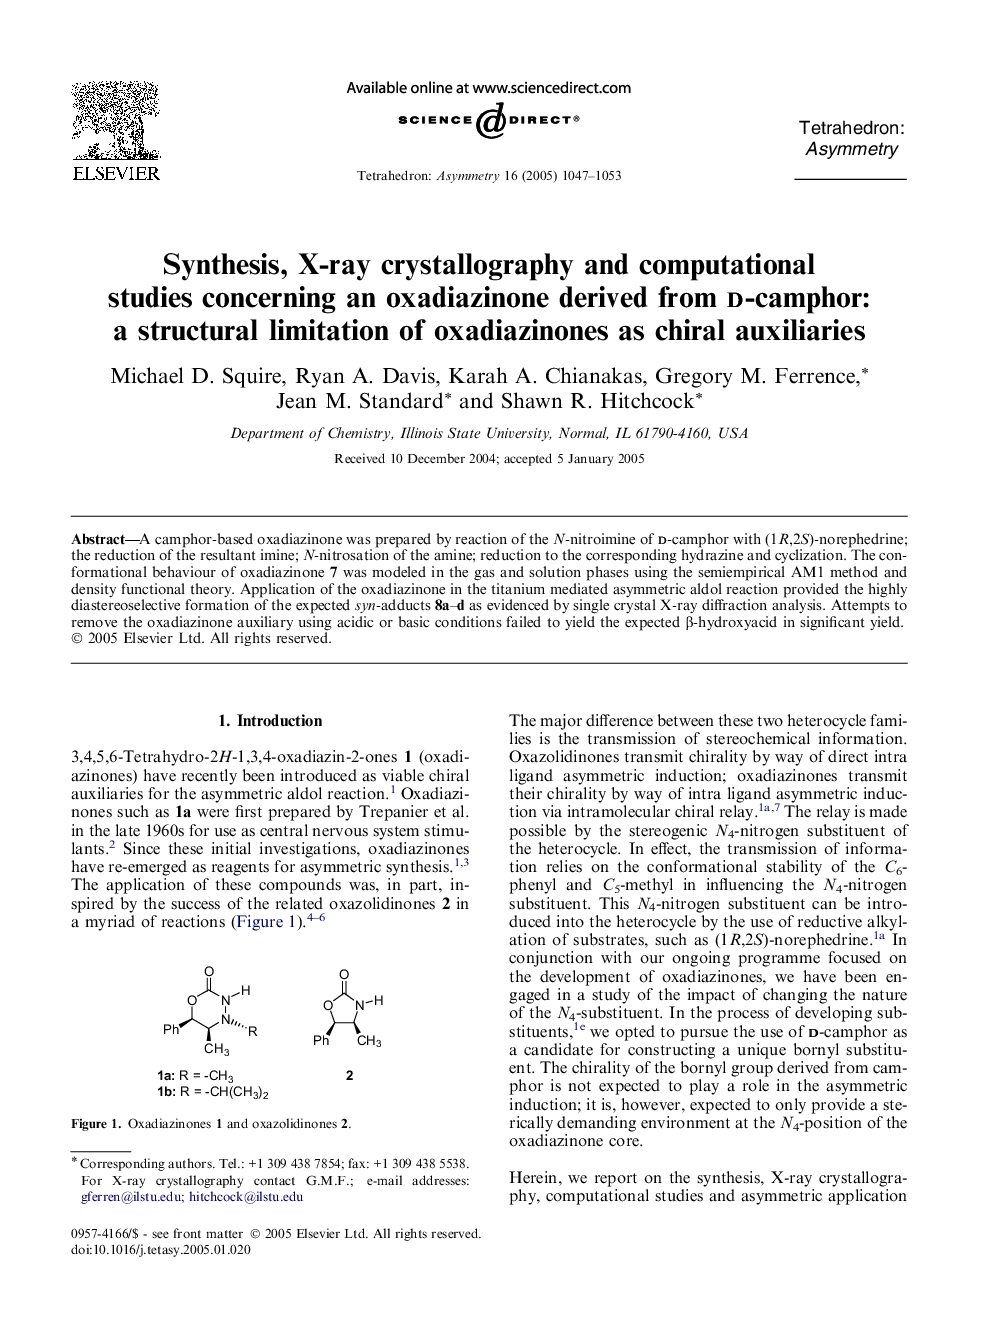 Synthesis, X-ray crystallography and computational studies concerning an oxadiazinone derived from d-camphor: a structural limitation of oxadiazinones as chiral auxiliaries